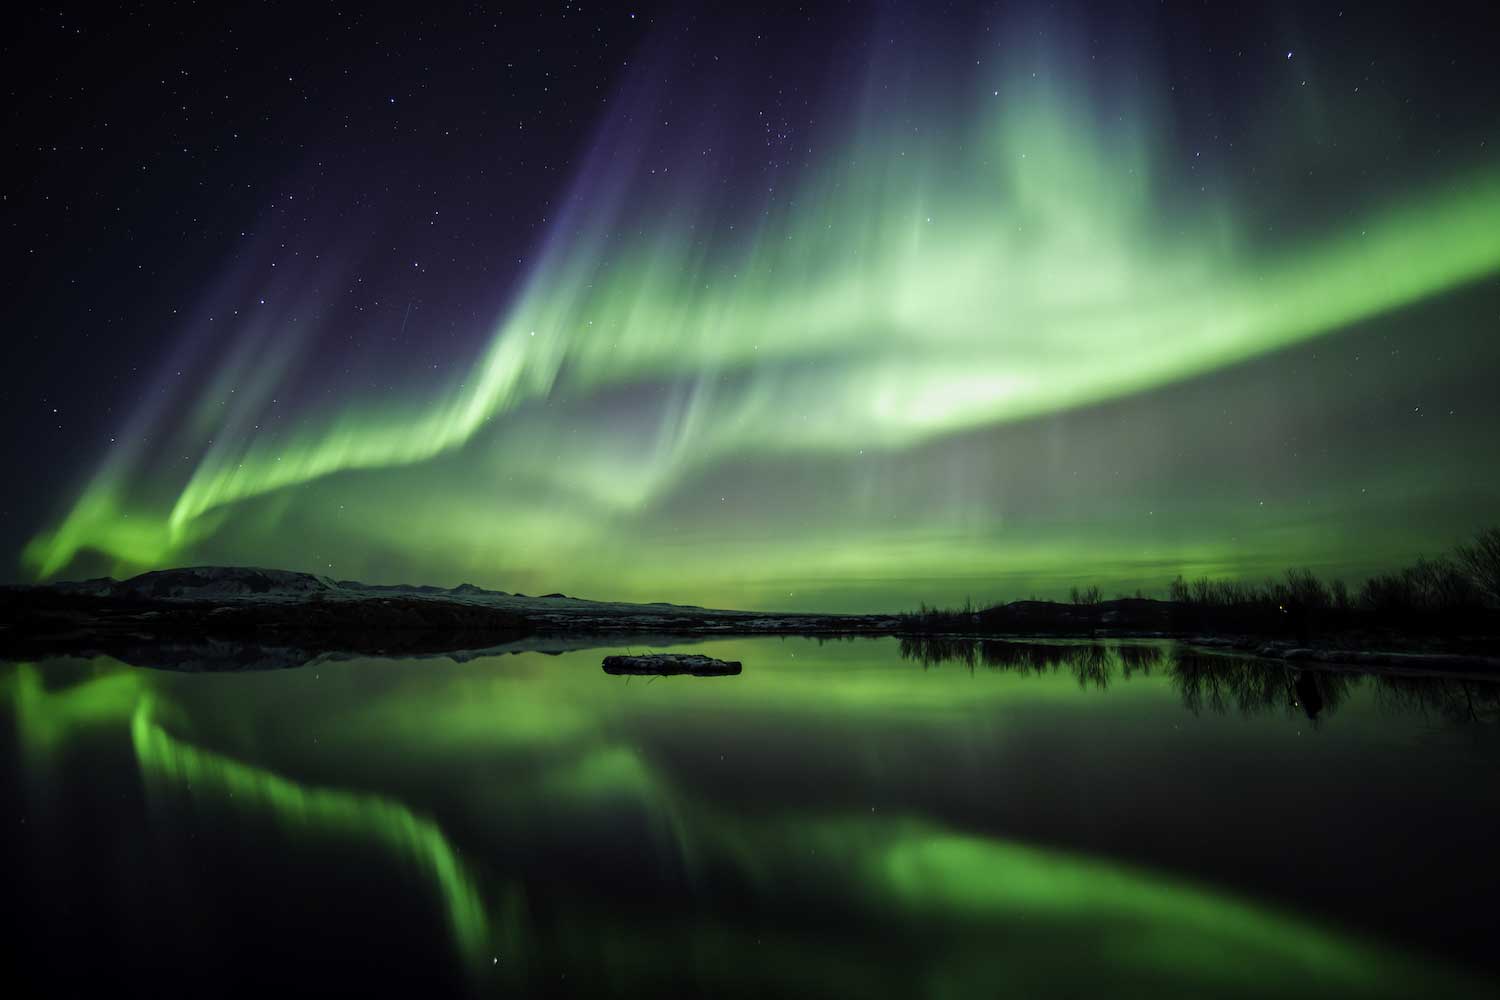 Nature curiosity: What are the northern lights?